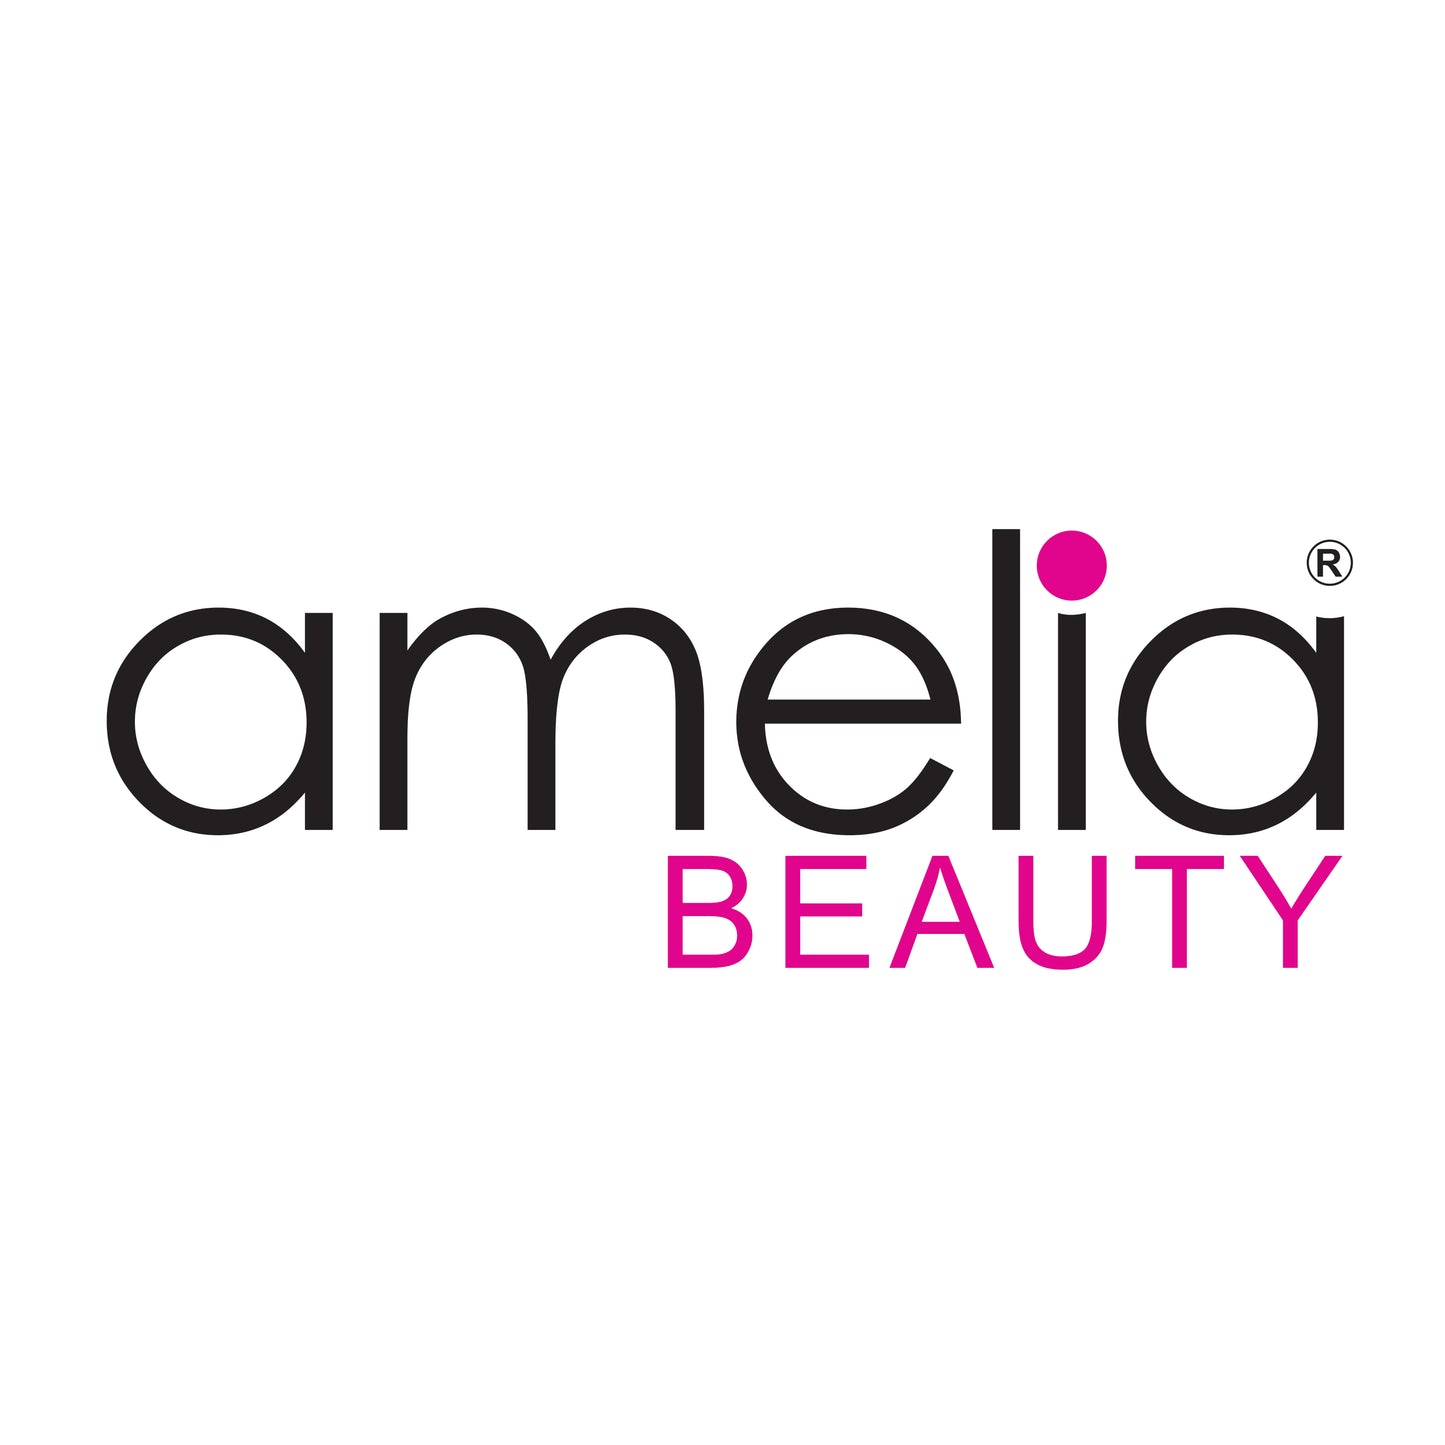 Amelia Beauty Products 8 Medium Elastic Hair Coils, 2.0in Diameter Thick Spiral Hair Ties, Gentle on Hair, Strong Hold and Minimizes Dents and Creases, Earth Tones Blend